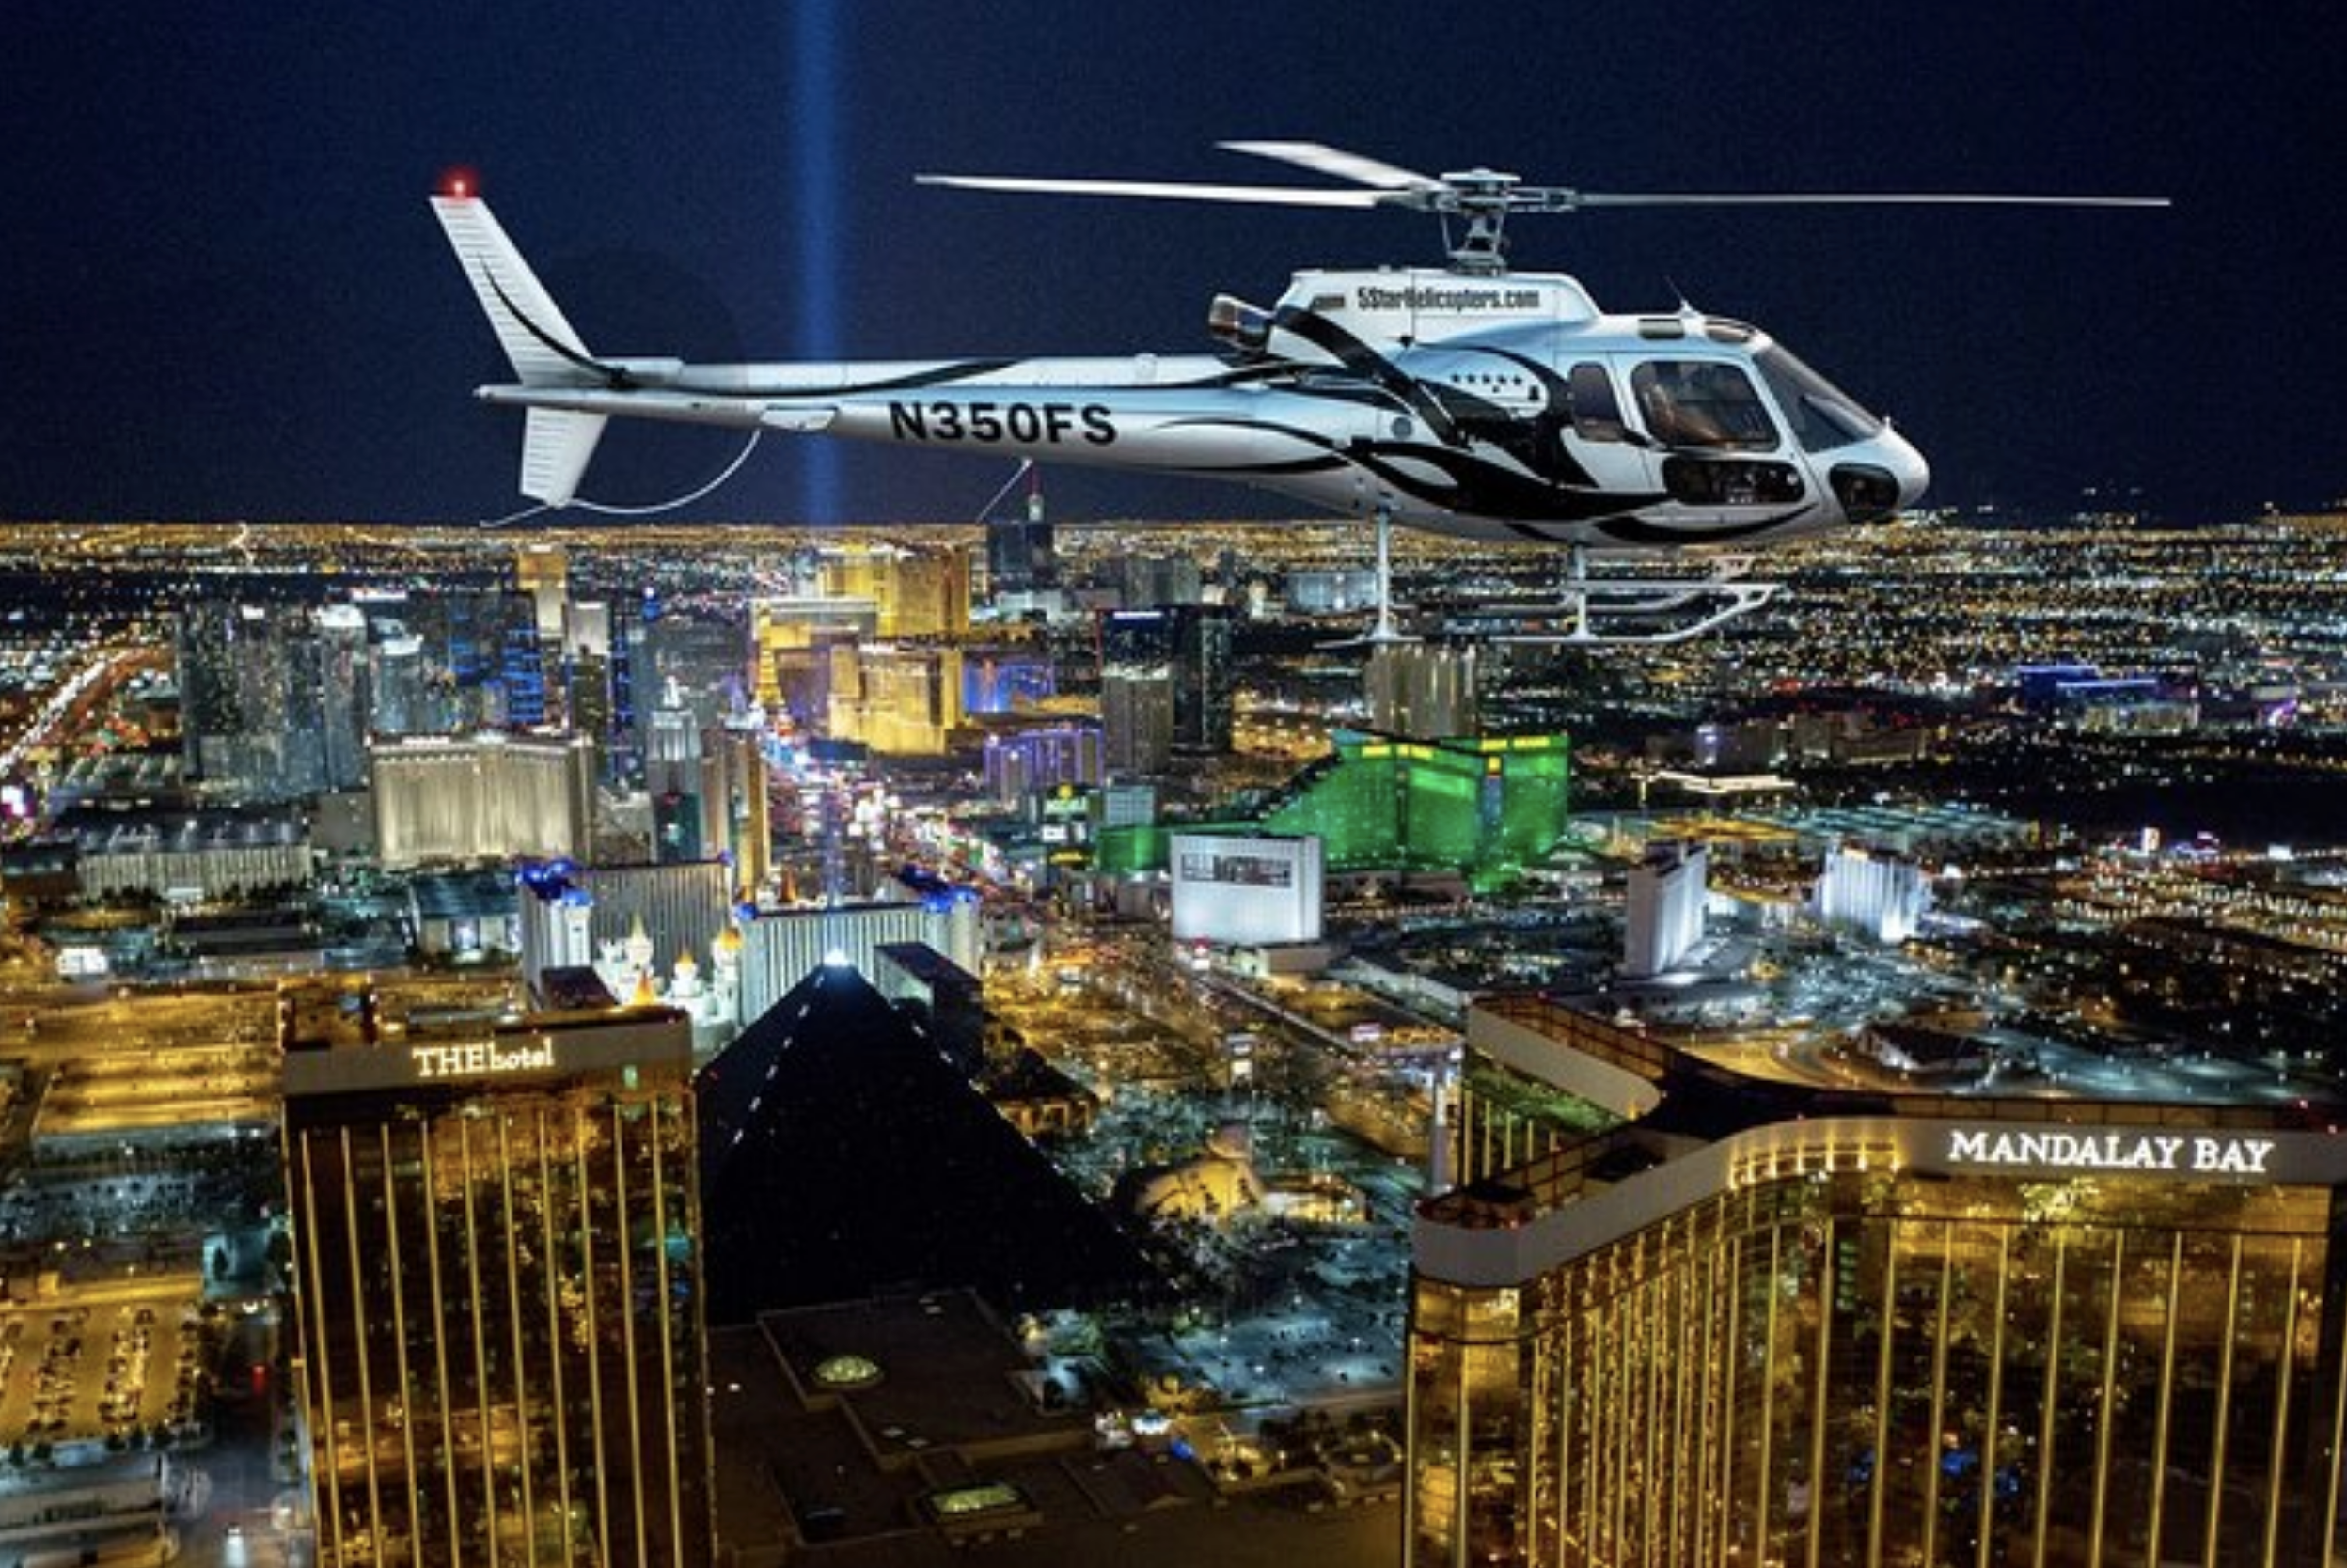 Take a helicopter ride over the Las Vegas Strip